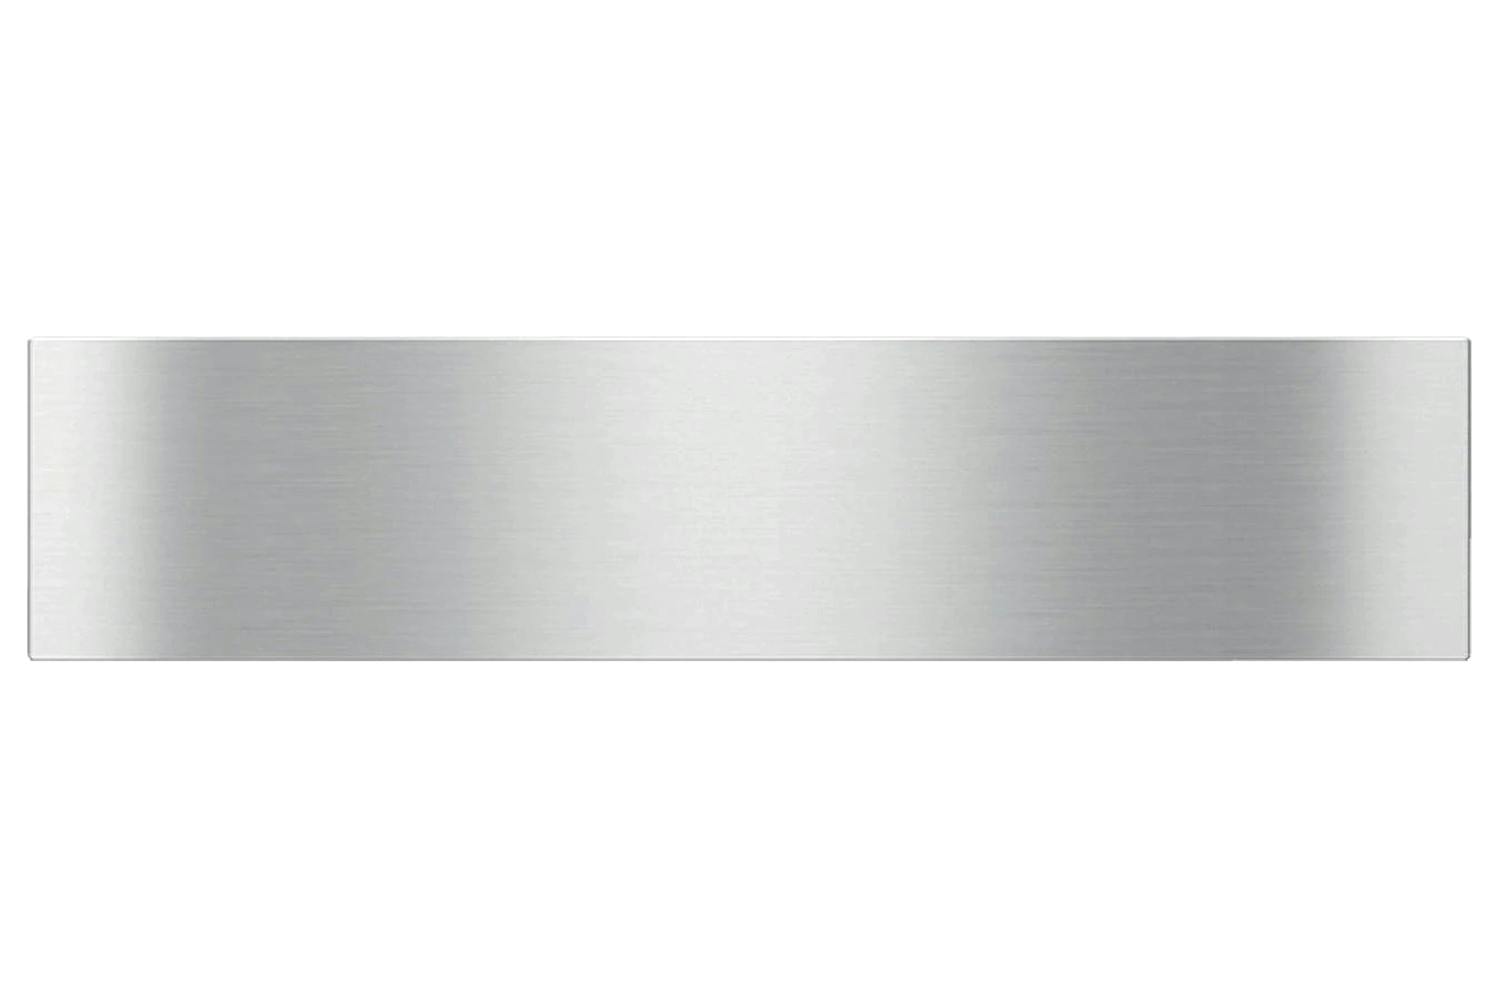 Miele Built-in Warming Drawer | ESW7110